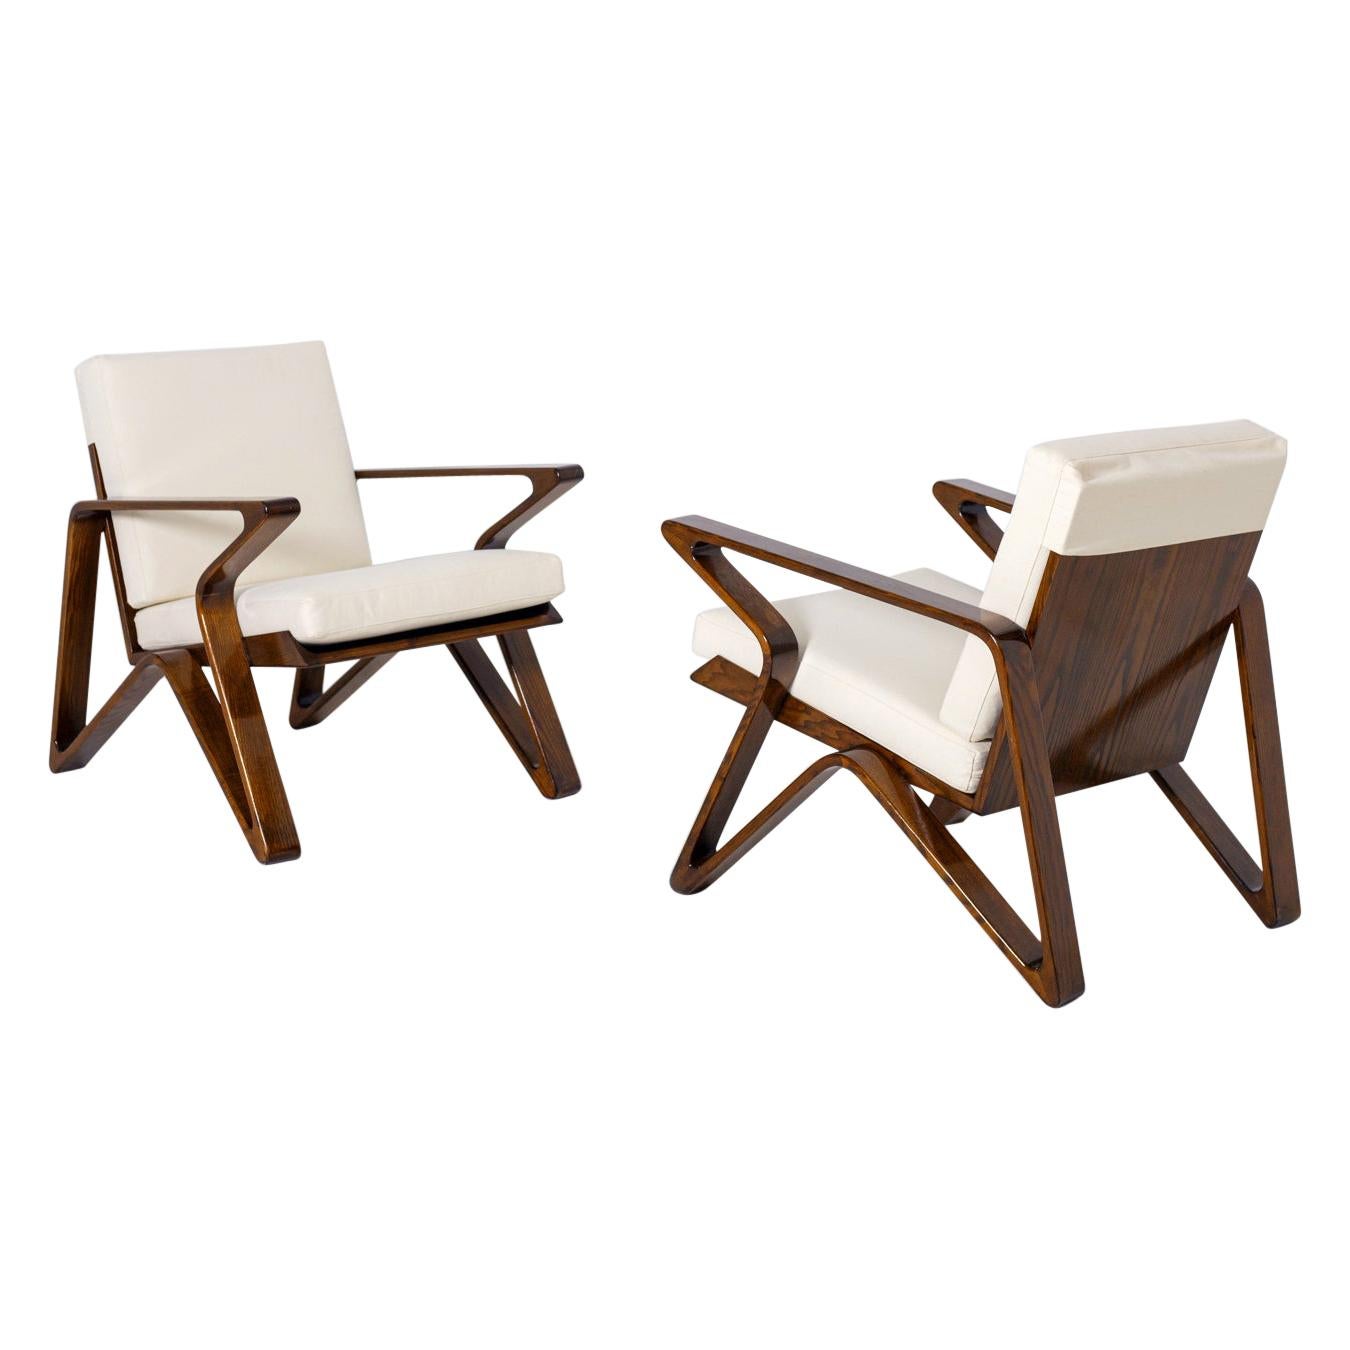 Pair of Italian Armchairs of the 20th Century in White Cotton and Walnut Wood